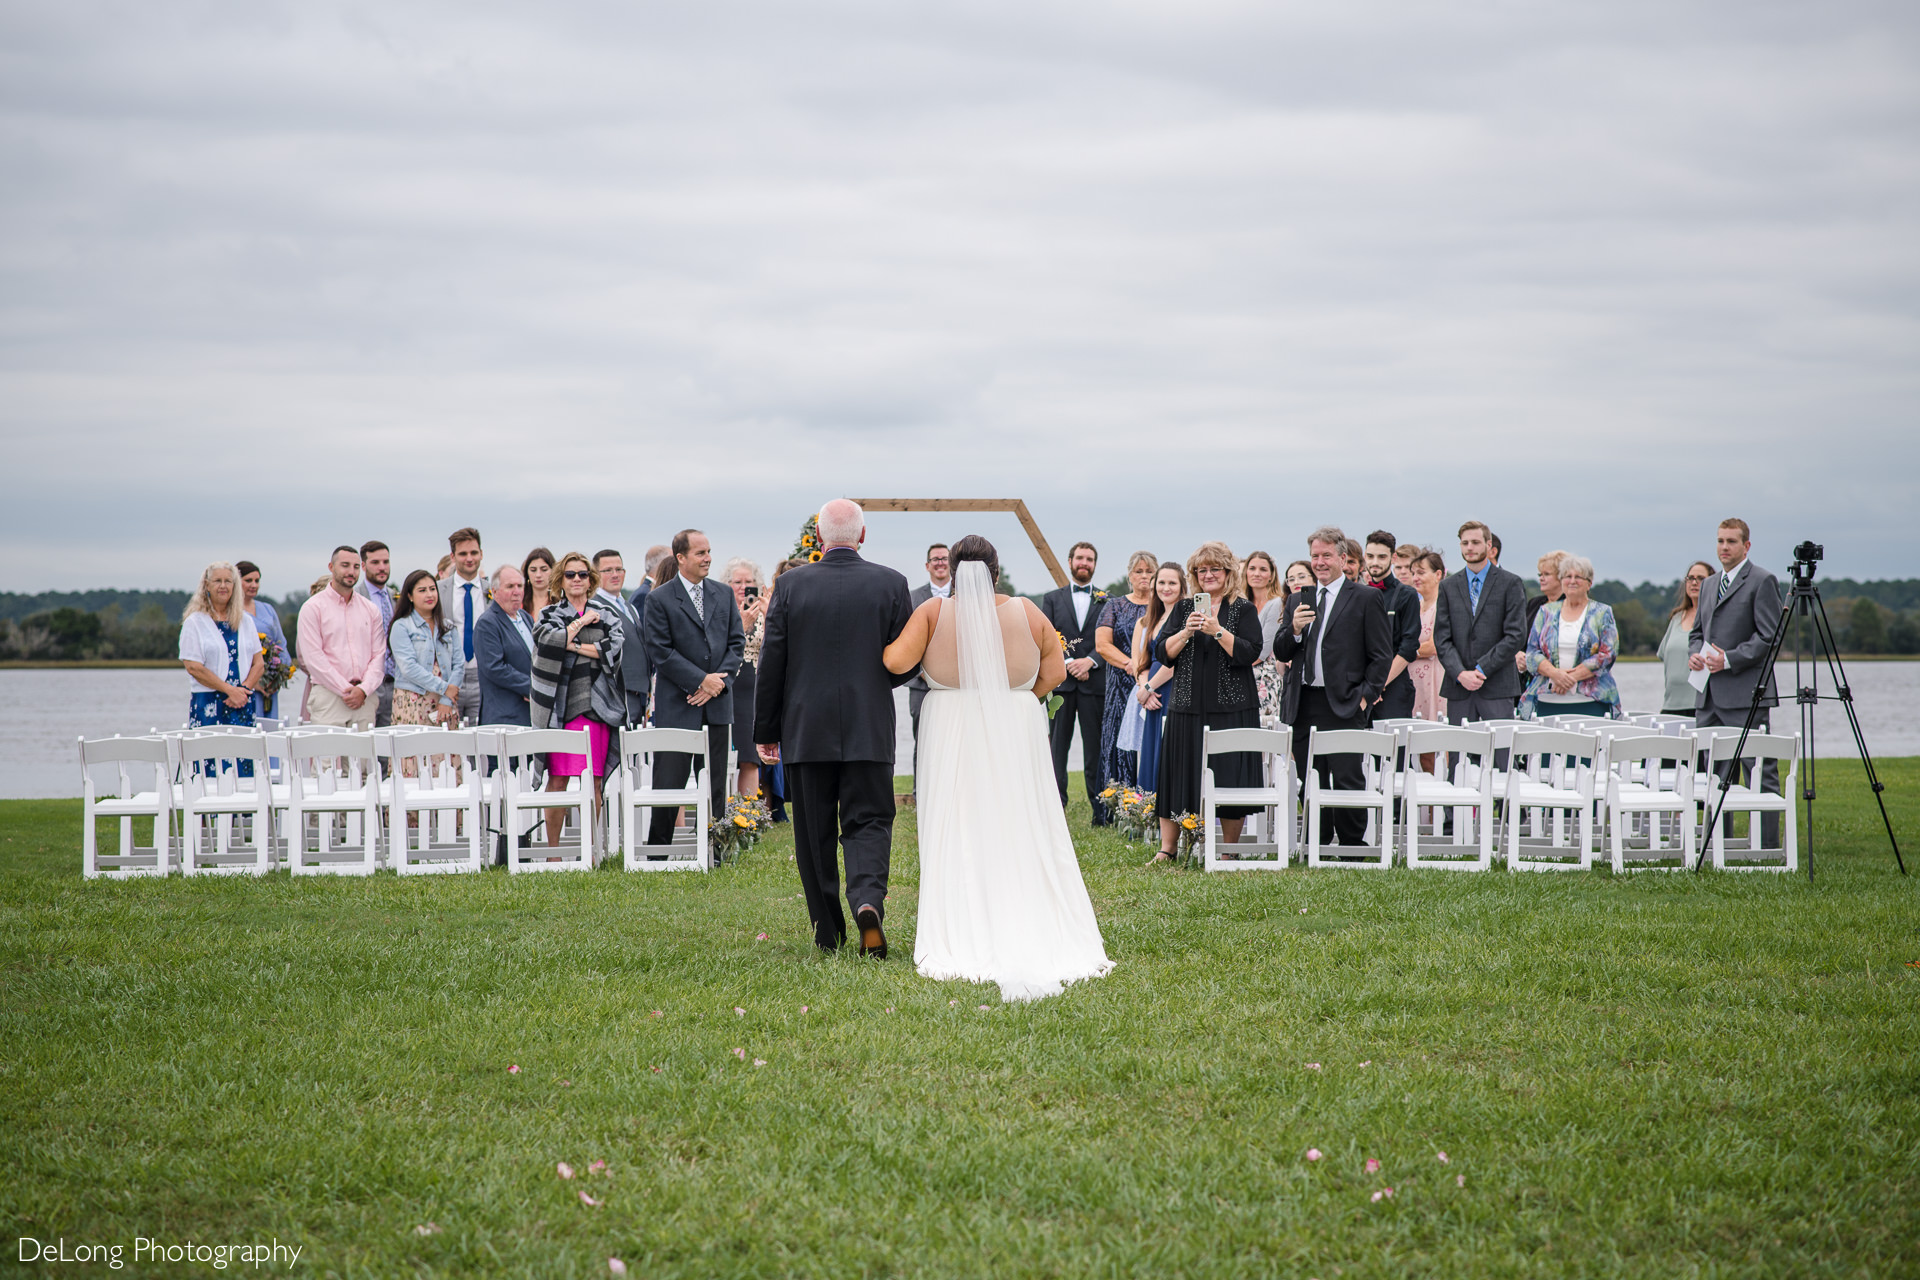 Ceremony image from behind as the bride is walked down the aisle at the Island House in Charleston, SC by Charlotte Wedding Photographers DeLong Photography